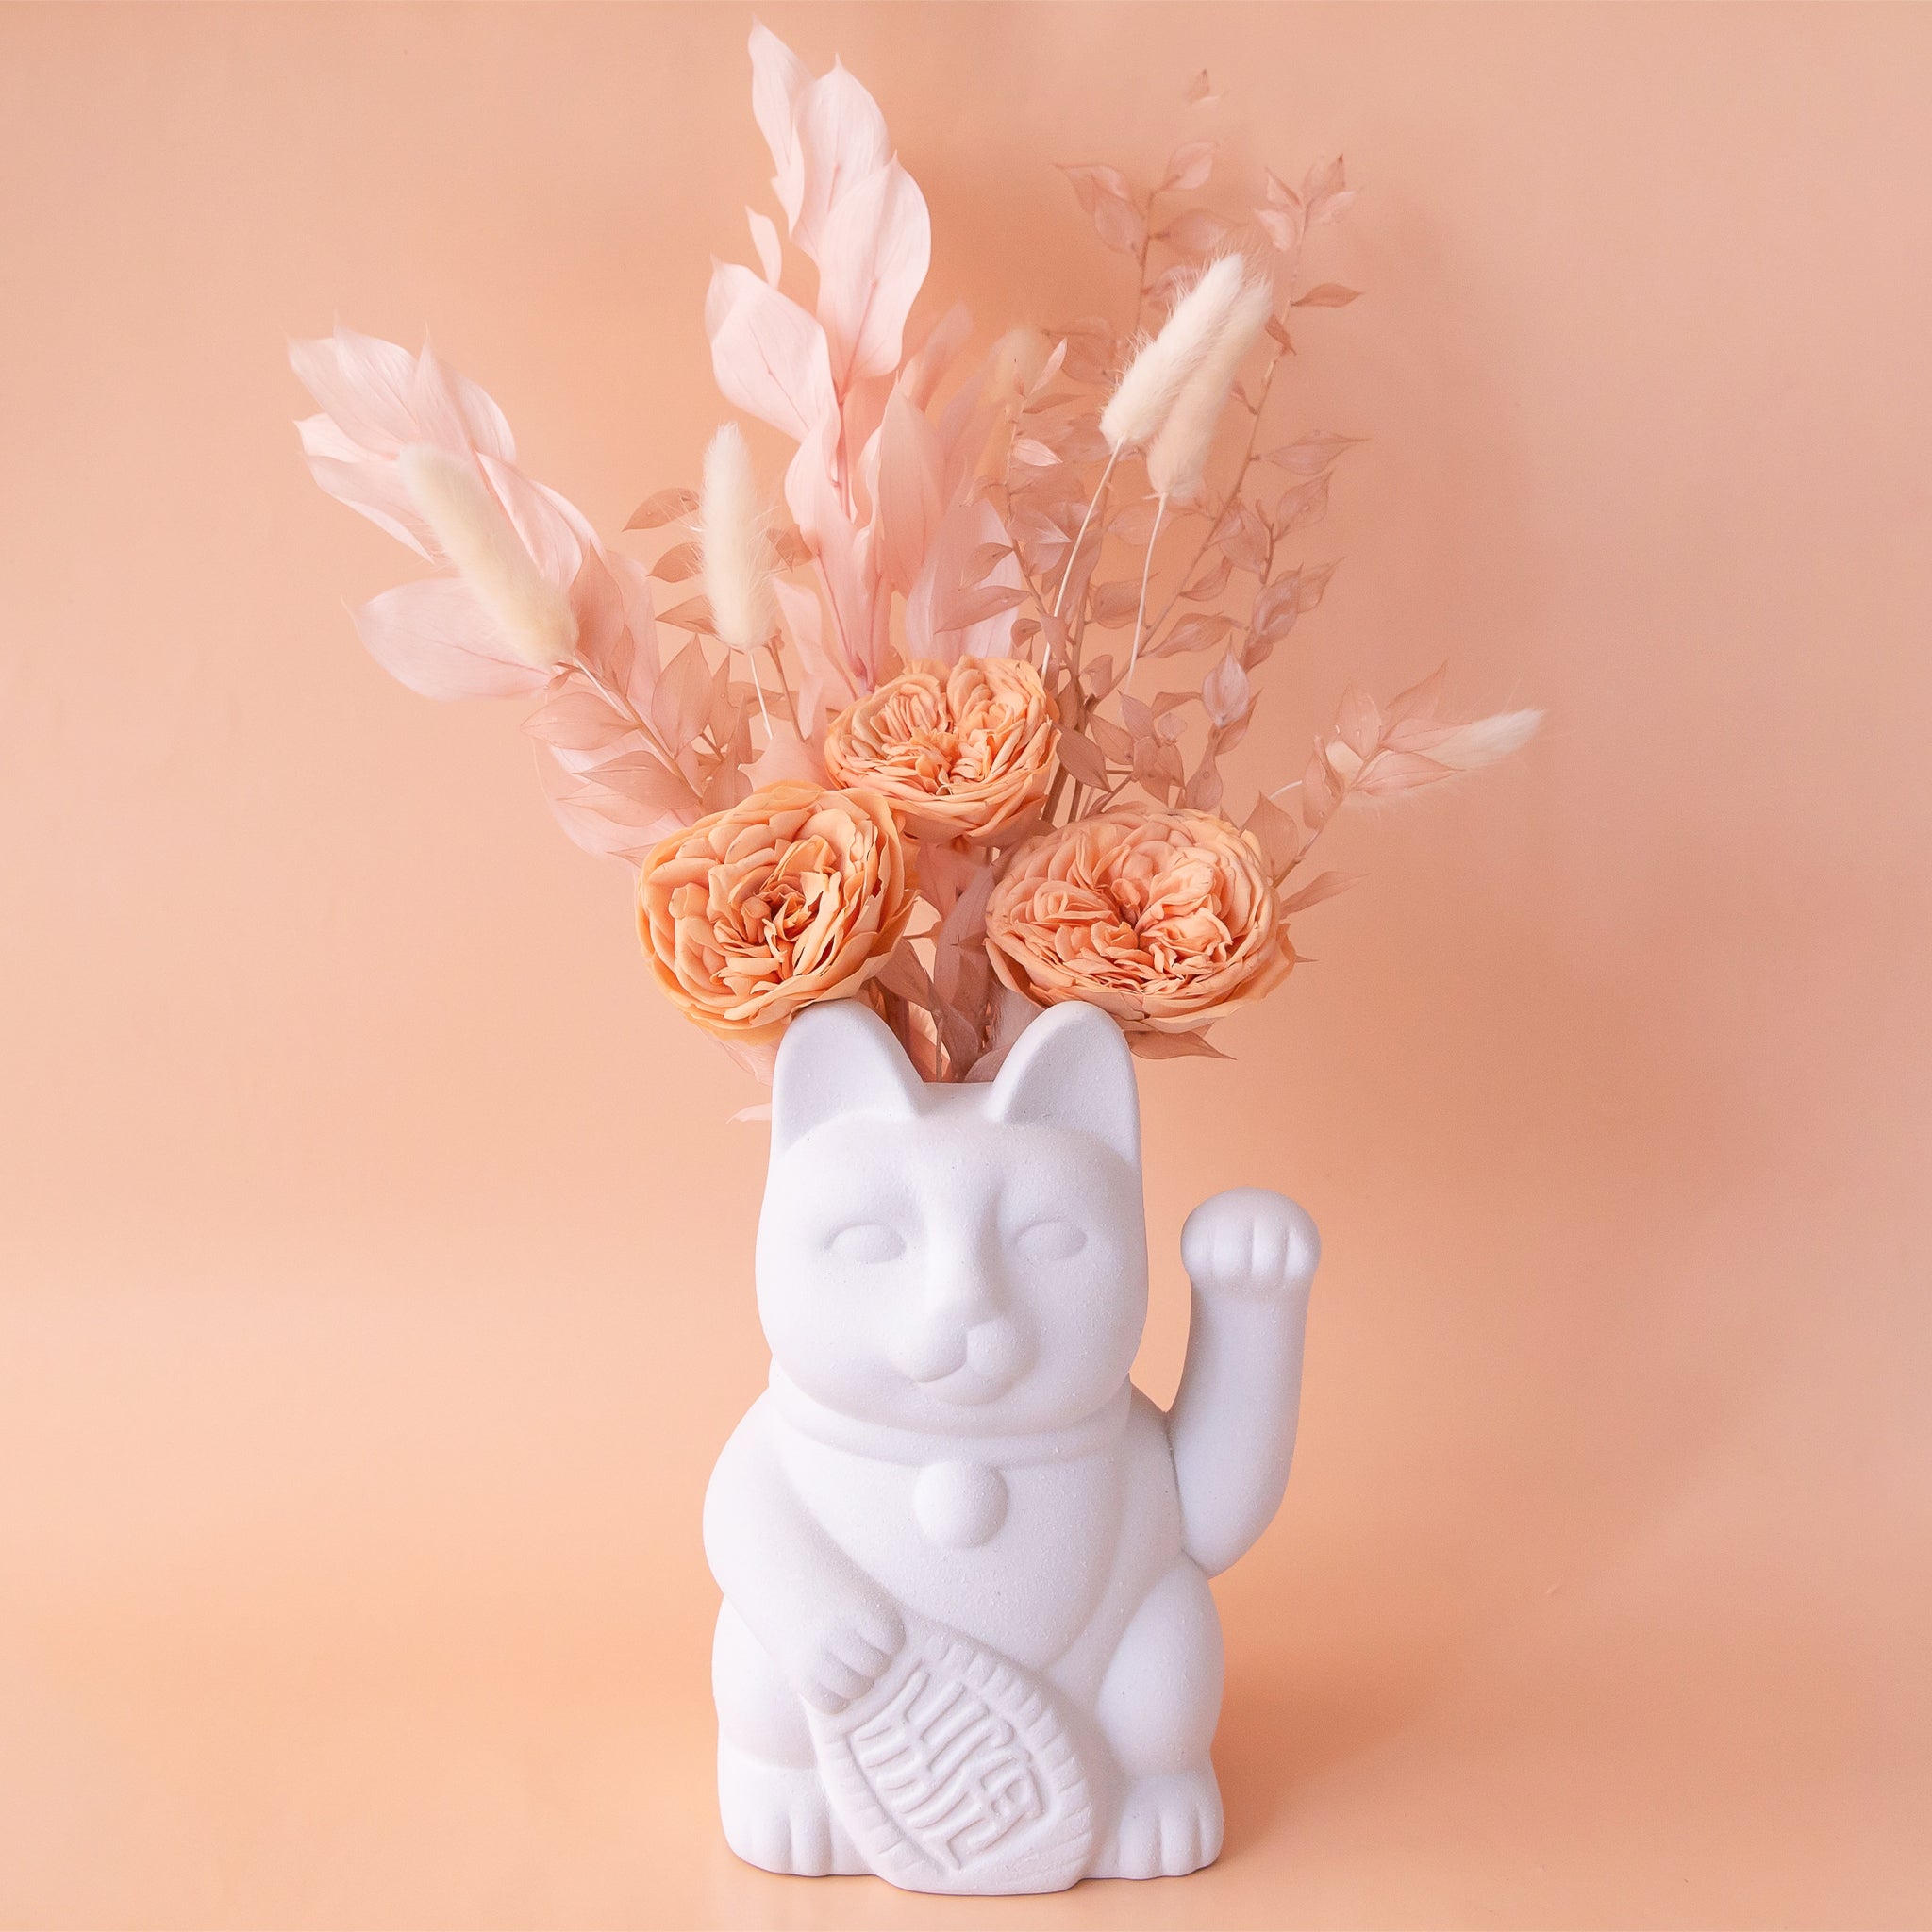 A ceramic lucky cat vase in white with its paw up in the waving position staged here with natural dried florals.